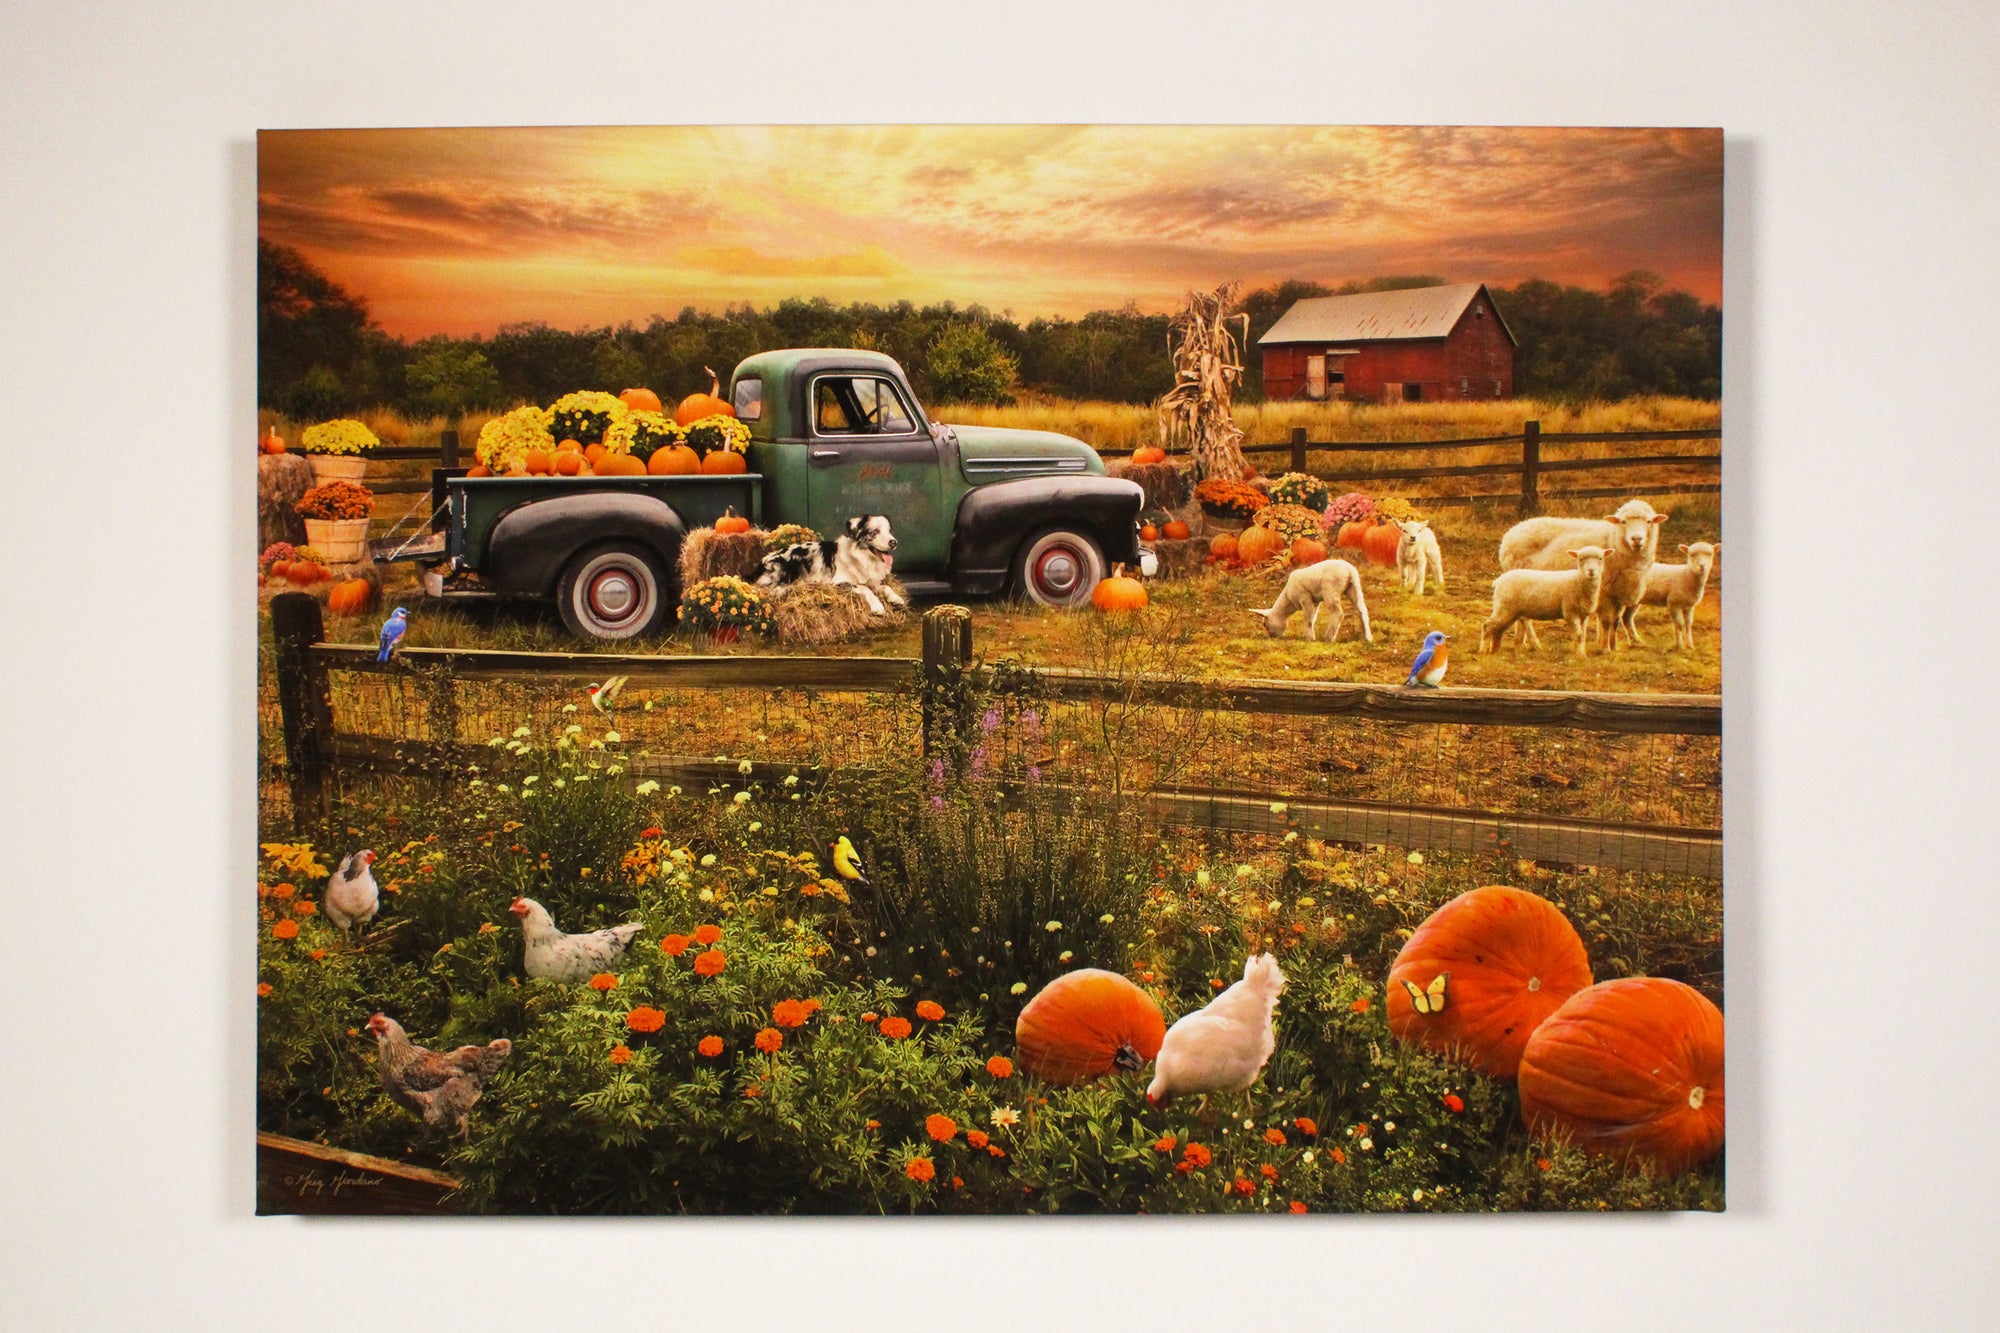 a vintage truck overflowing with vibrant pumpkins and delicate flower pots in its bed. The scene is set in an overgrown planter bed, where cute little chickens peck away at the ground amidst the plentiful pumpkins.  As you gaze beyond the fence, you'll be greeted by a picturesque family of sheep, their loyal canine companion, and a sea of hay bales, corn stalks, and more pumpkins.